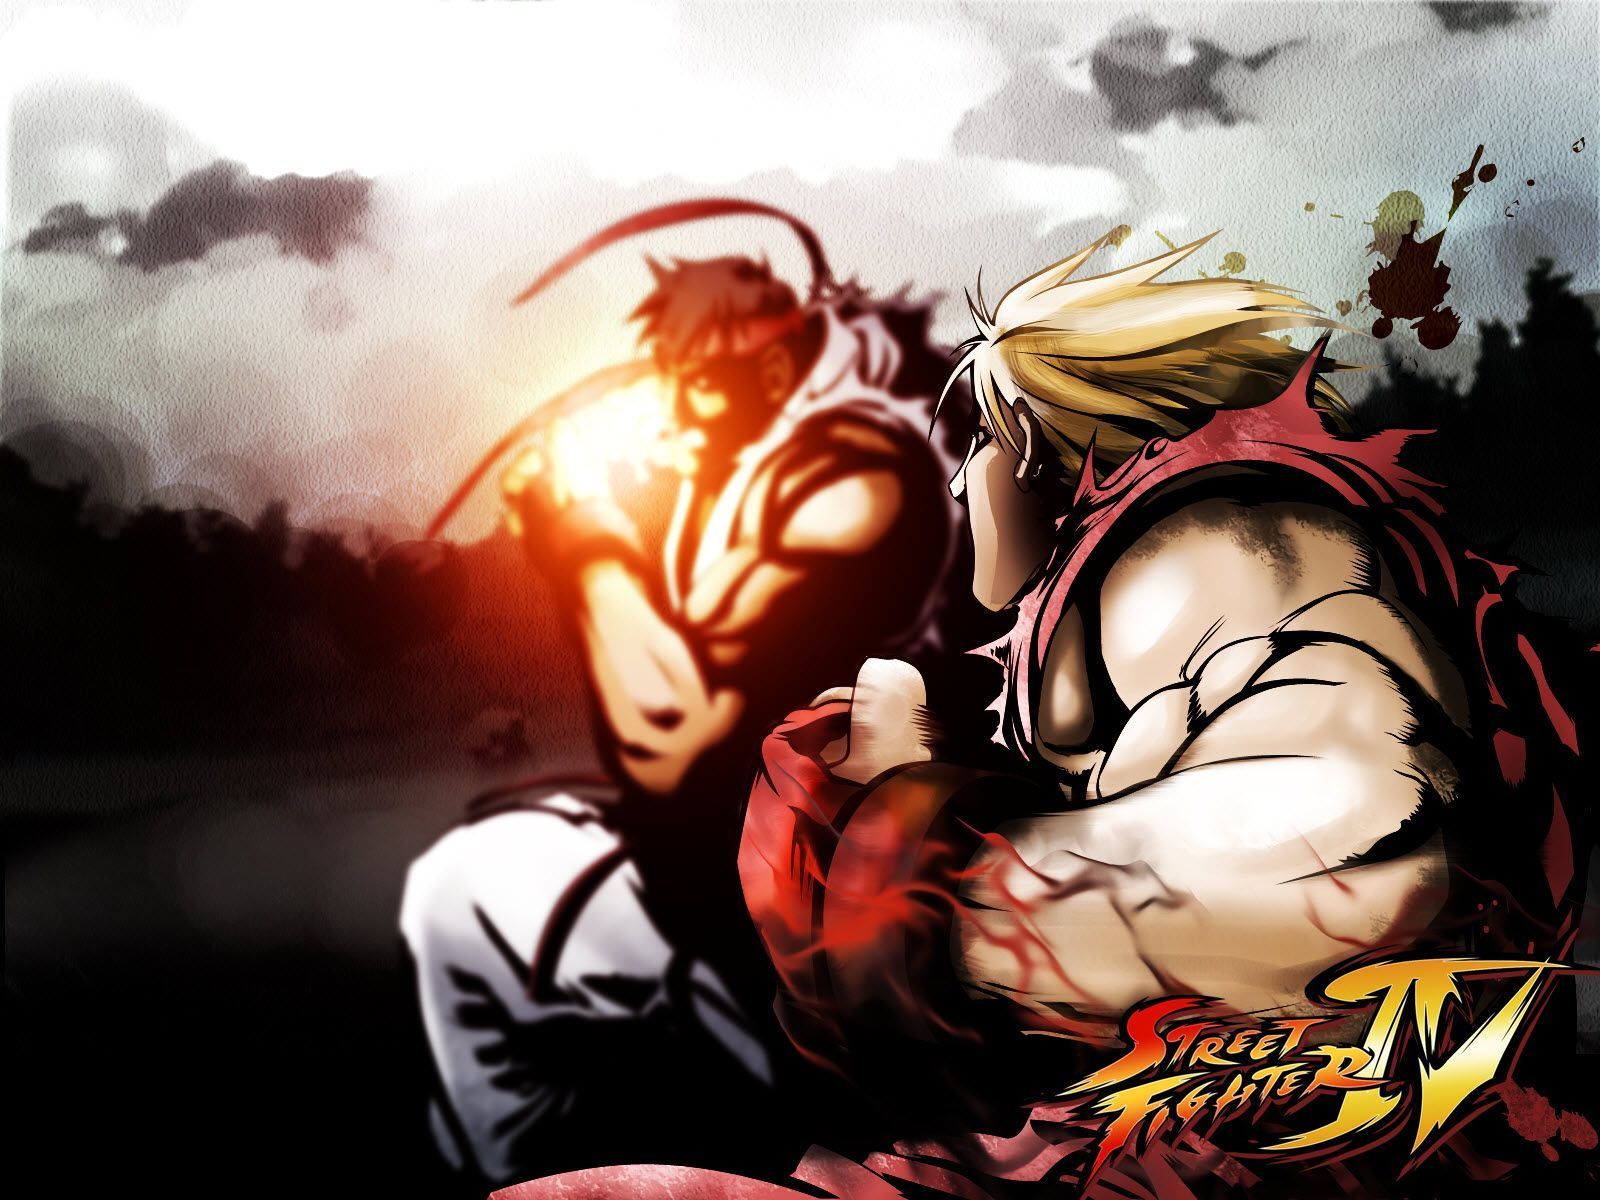 Street Fighter 4 Game Wallpapers | HD Wallpapers